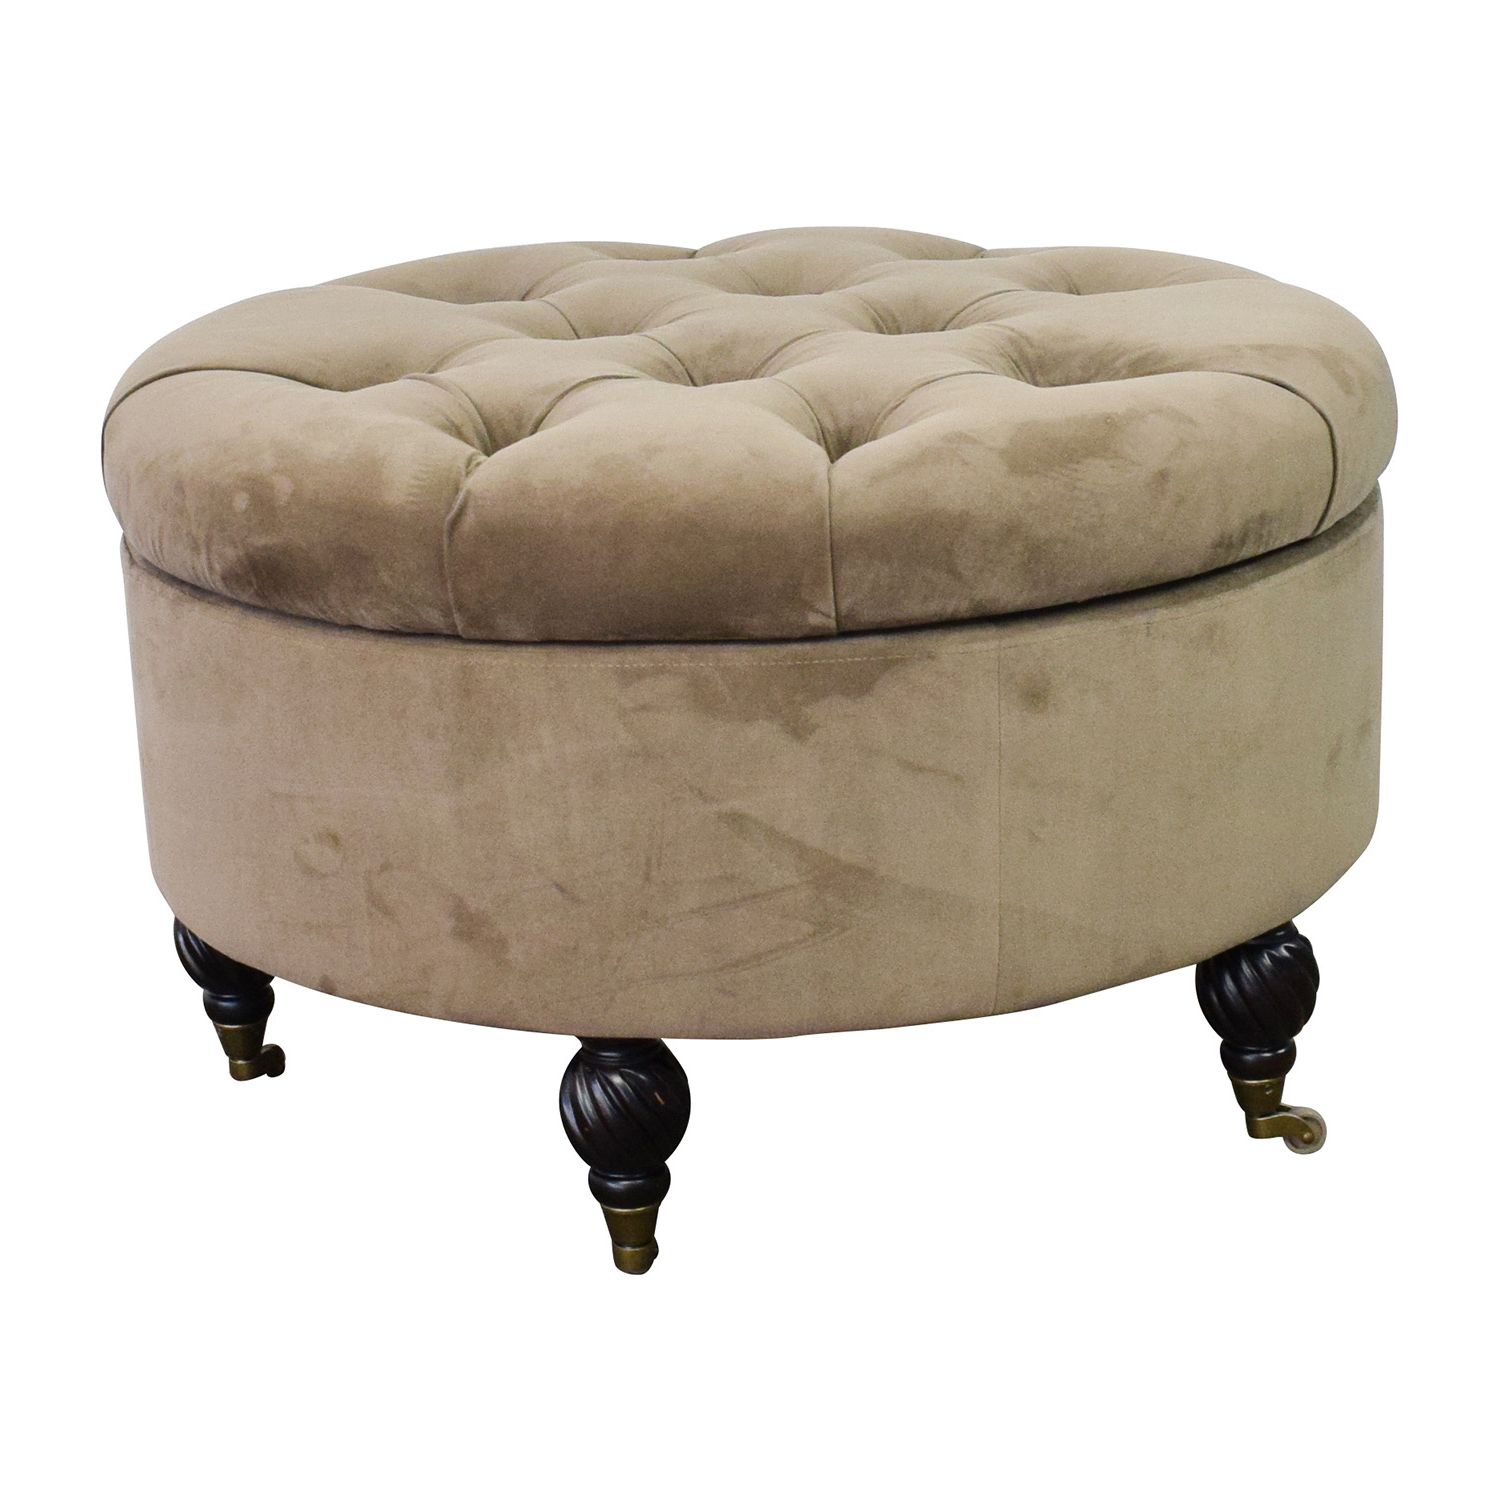 [%55% Off – Frontgate Frontgate Round Tufted Storage Ottoman / Storage For Well Liked Tufted Ottomans|tufted Ottomans Regarding Well Known 55% Off – Frontgate Frontgate Round Tufted Storage Ottoman / Storage|favorite Tufted Ottomans Throughout 55% Off – Frontgate Frontgate Round Tufted Storage Ottoman / Storage|2017 55% Off – Frontgate Frontgate Round Tufted Storage Ottoman / Storage With Tufted Ottomans%] (View 5 of 10)